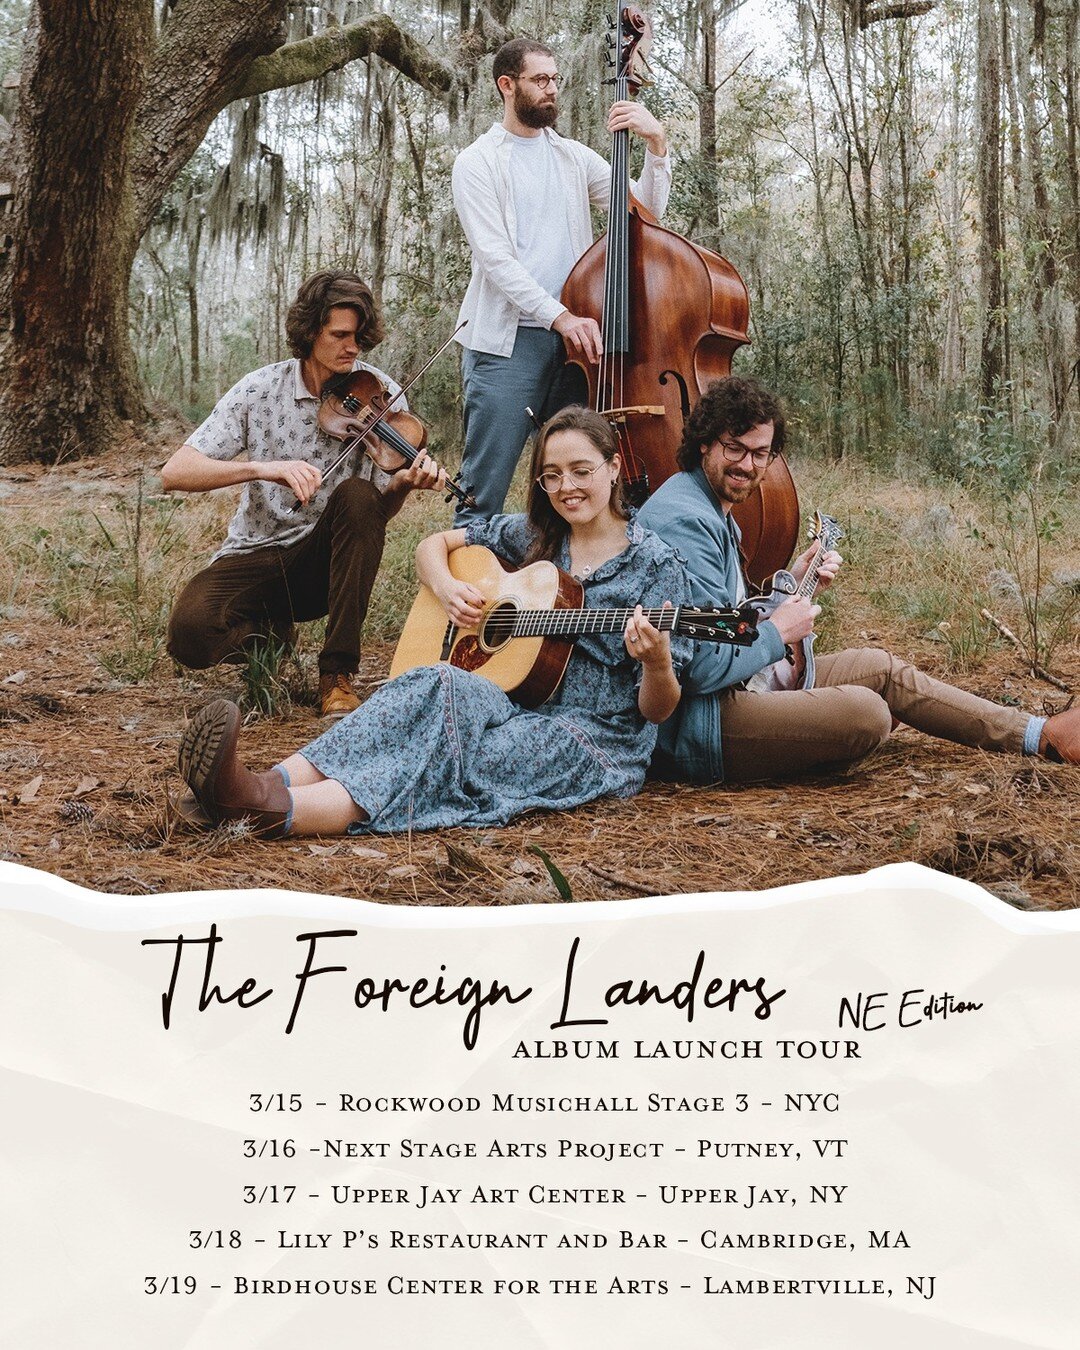 We just announced some additional dates for our Album Launch Tour in the NE! So excited to take this band up north this March! ⬆️⬆️⬆️

3/15 - @rockwoodmusichall 
3/16 - @nextstagearts 
3/17 - @ujartcenter 
3/18 - @lilypschicken 
3/19 - @birdhousecent